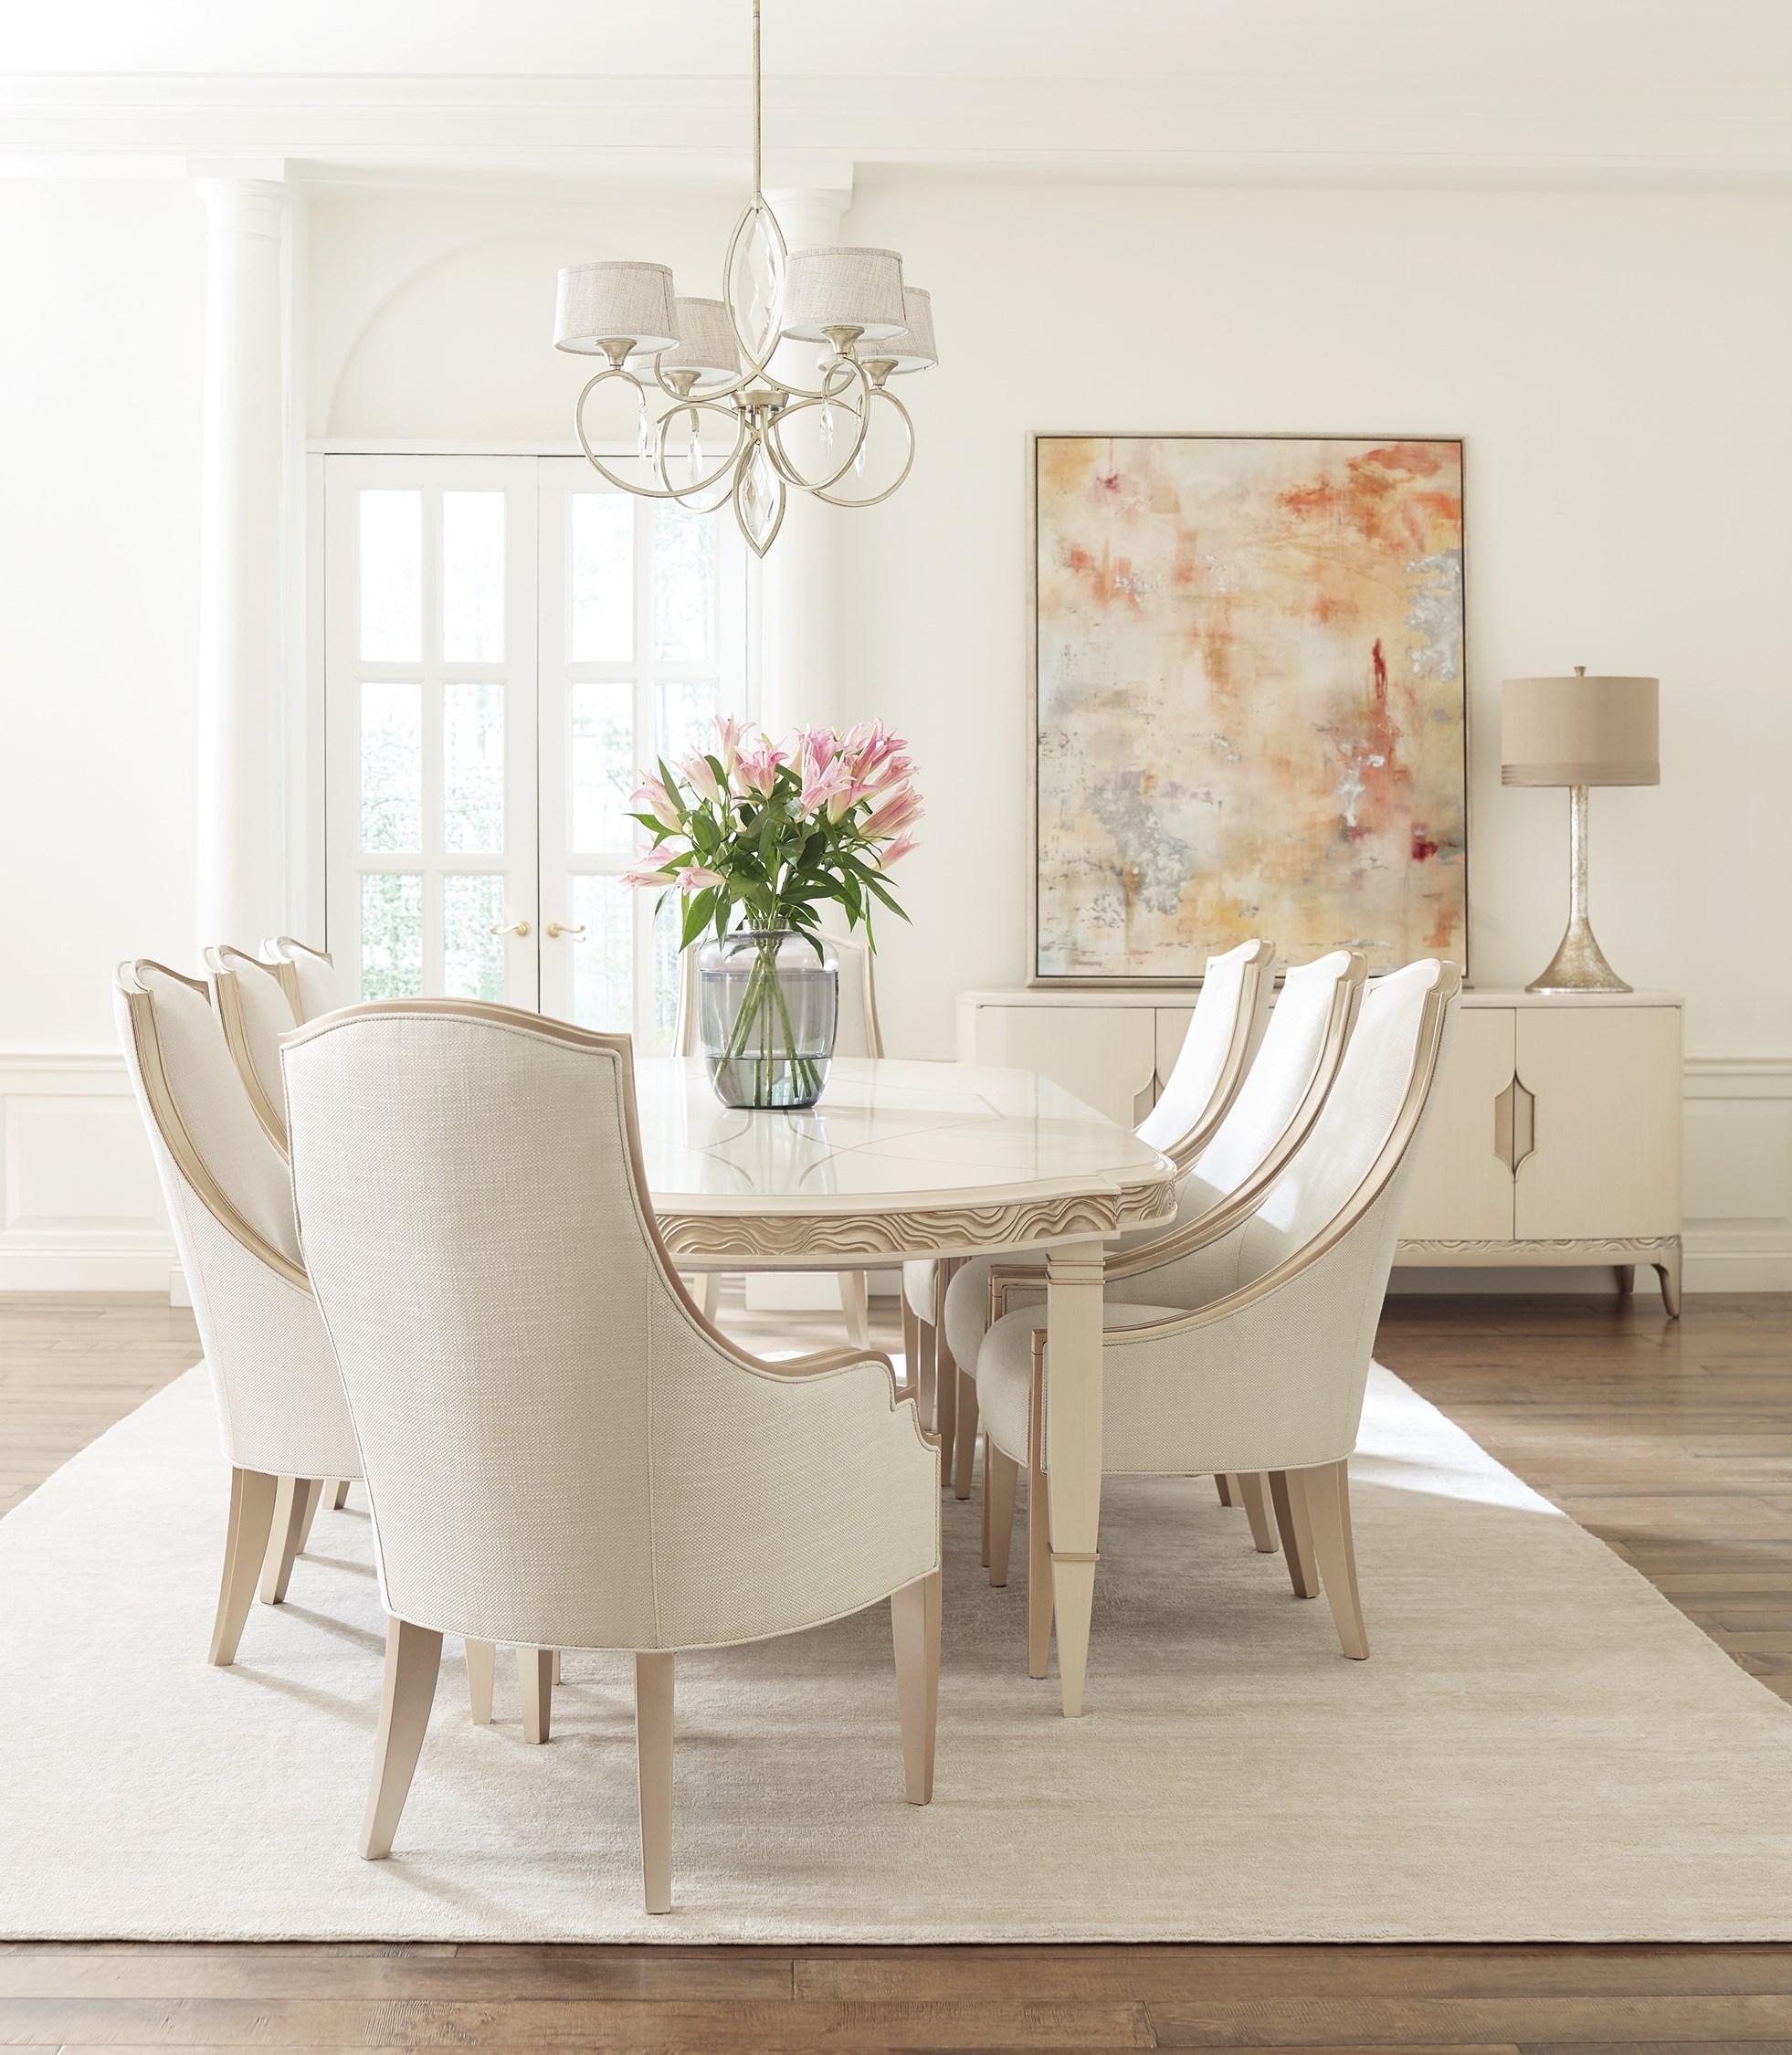 Contemporary Dining Table Set ADELA DINING TABLE / ADELA SIDE CHAIR / ADELA ARM CHAIR / ADELA BUFFET C012-016-201-Set-10 in Off-White, Light Grey, Taupe Fabric